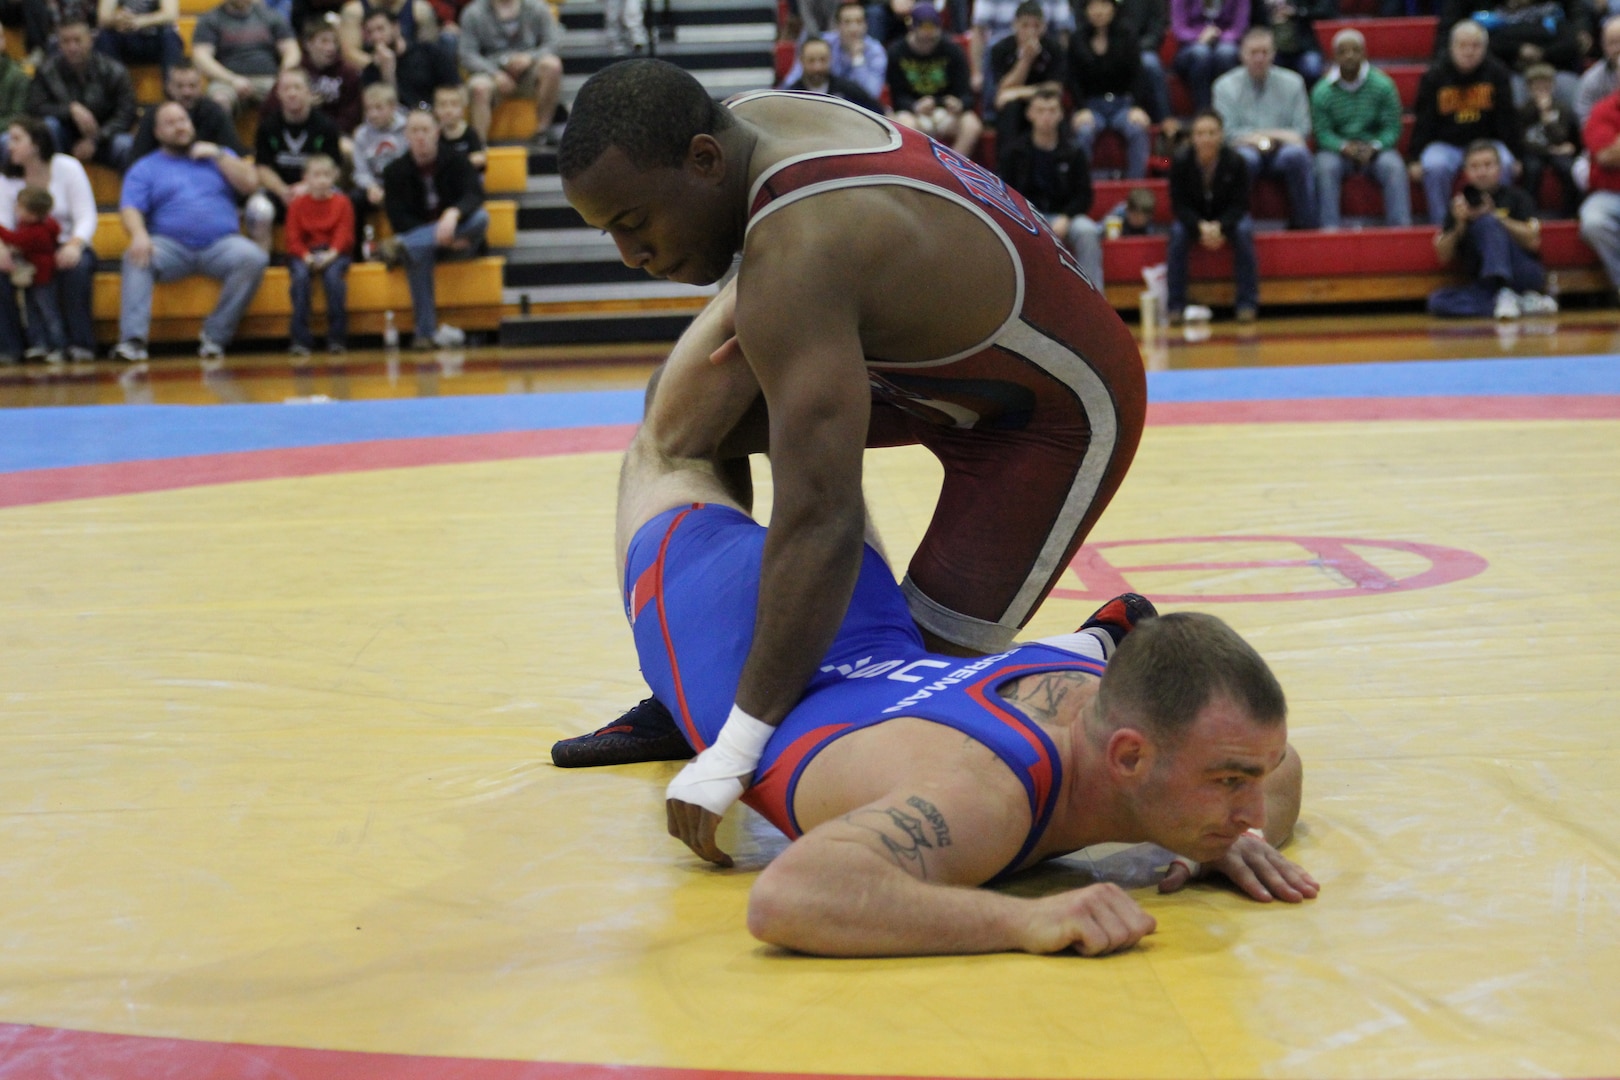 70kg Freestyle match between 2012 Olympian Army SGT Justin Lester (Fort Carson, CO) and Marine Cpl Joseph Forman (Camp Lejeune, NC) for gold.  Lester defeated Forman 12-2 to win Armed Forces gold, with Forman taking silver.  